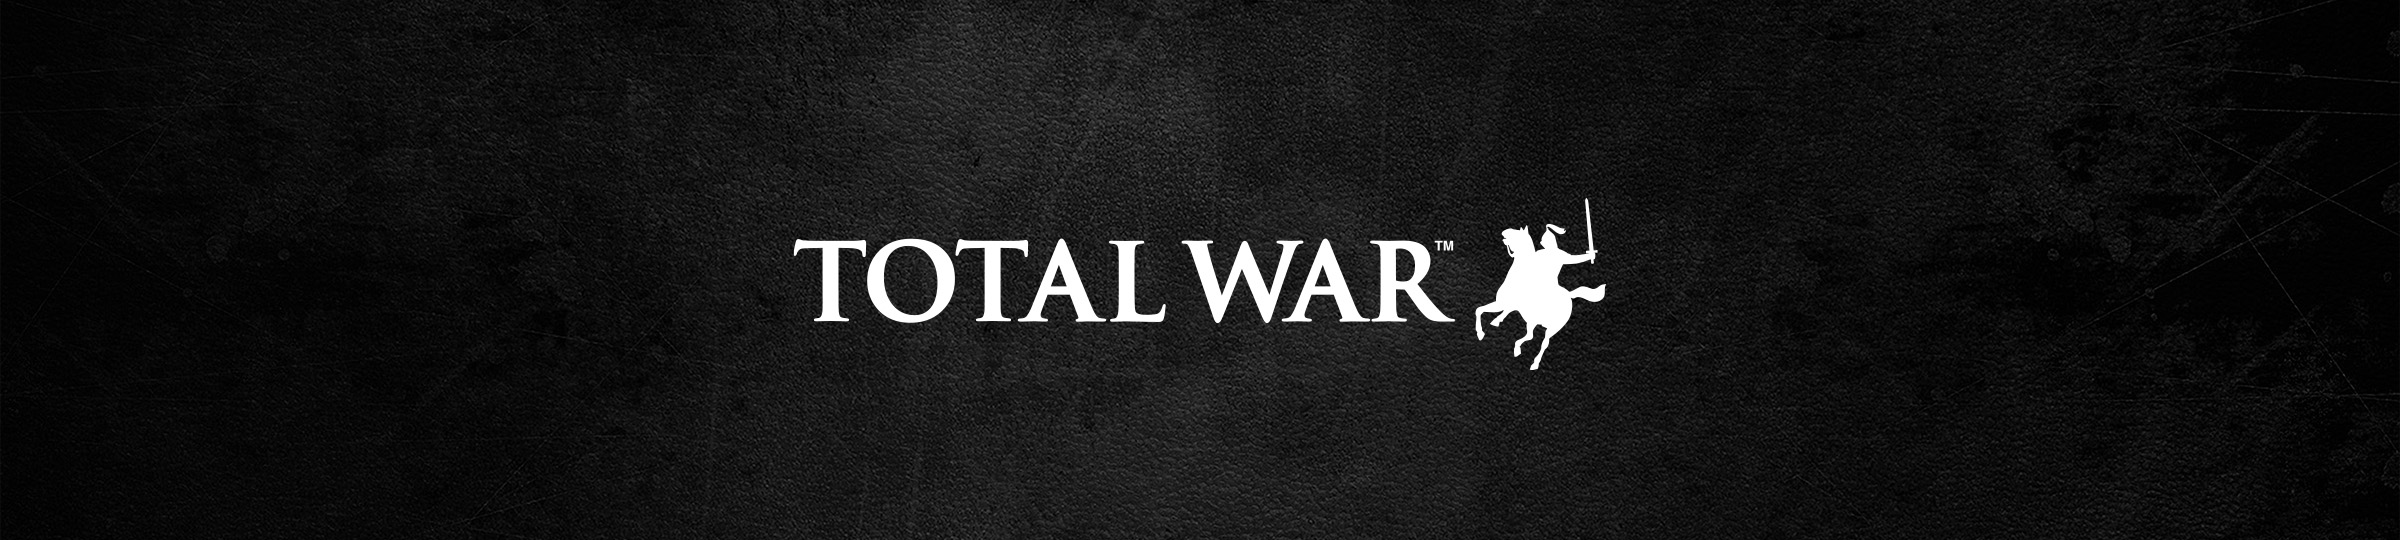 A Message from Total War’s Leadership Team - Total War